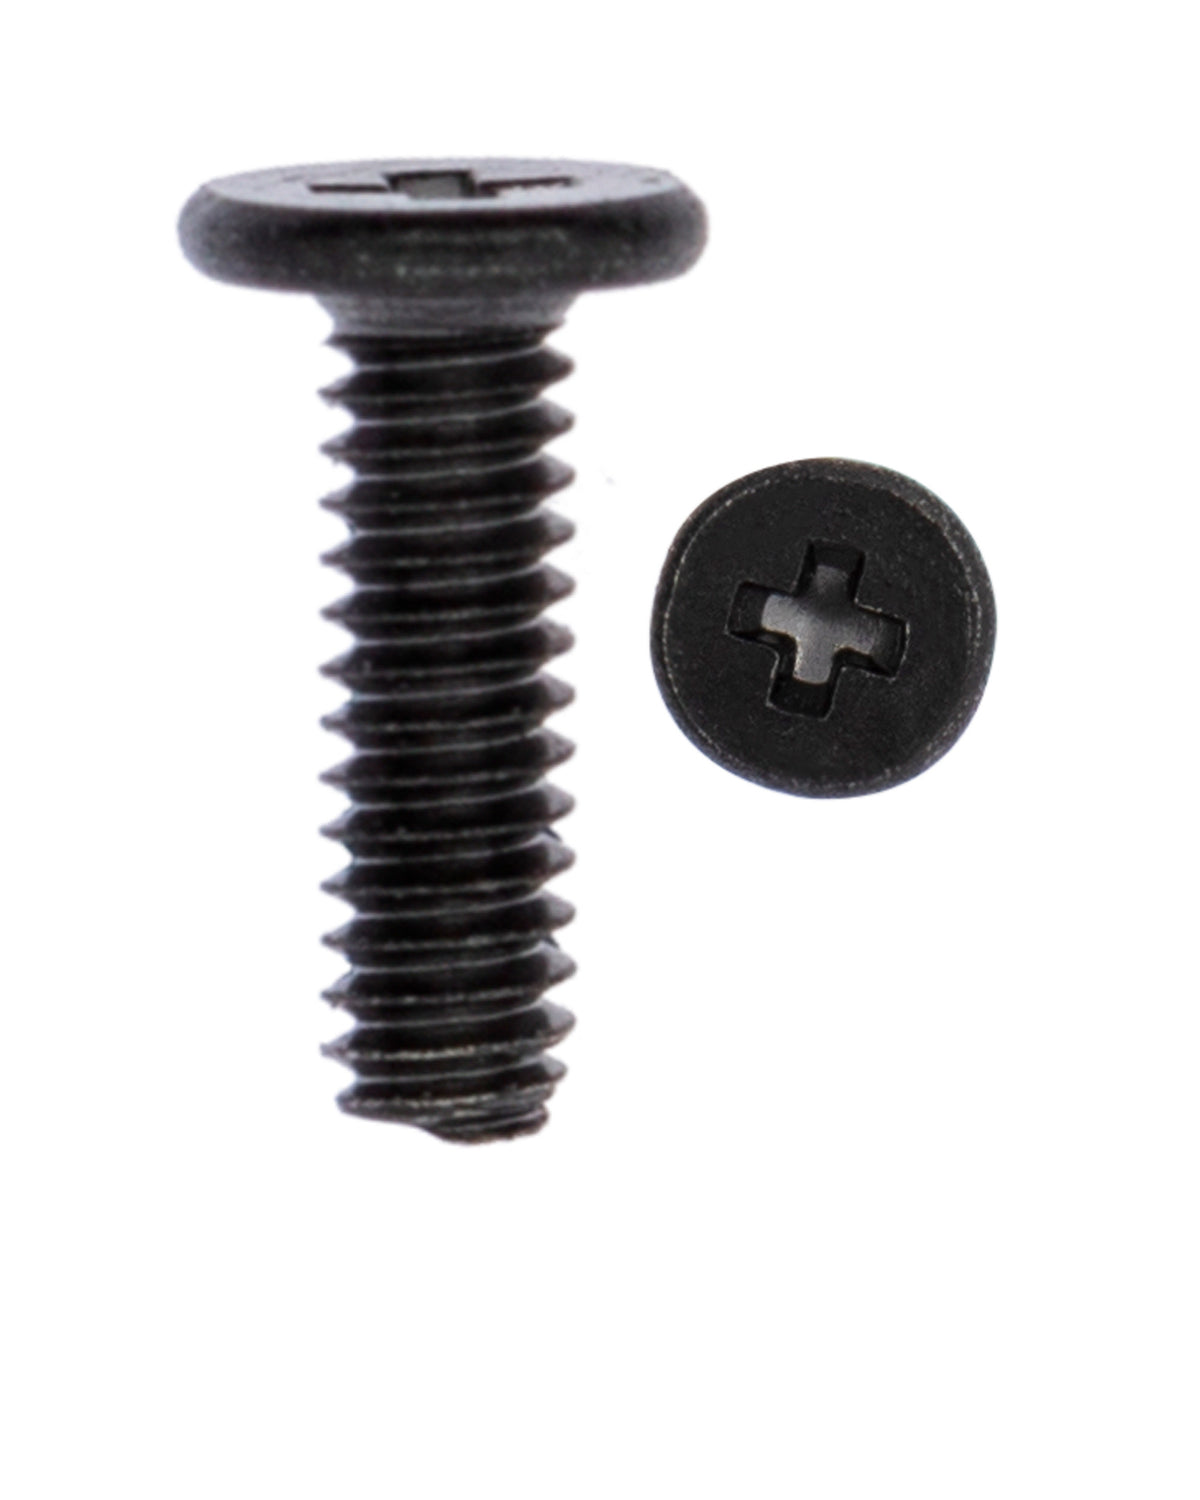 COMPLETE SCREW SET COMPATIBLE FOR IPAD AIR 4